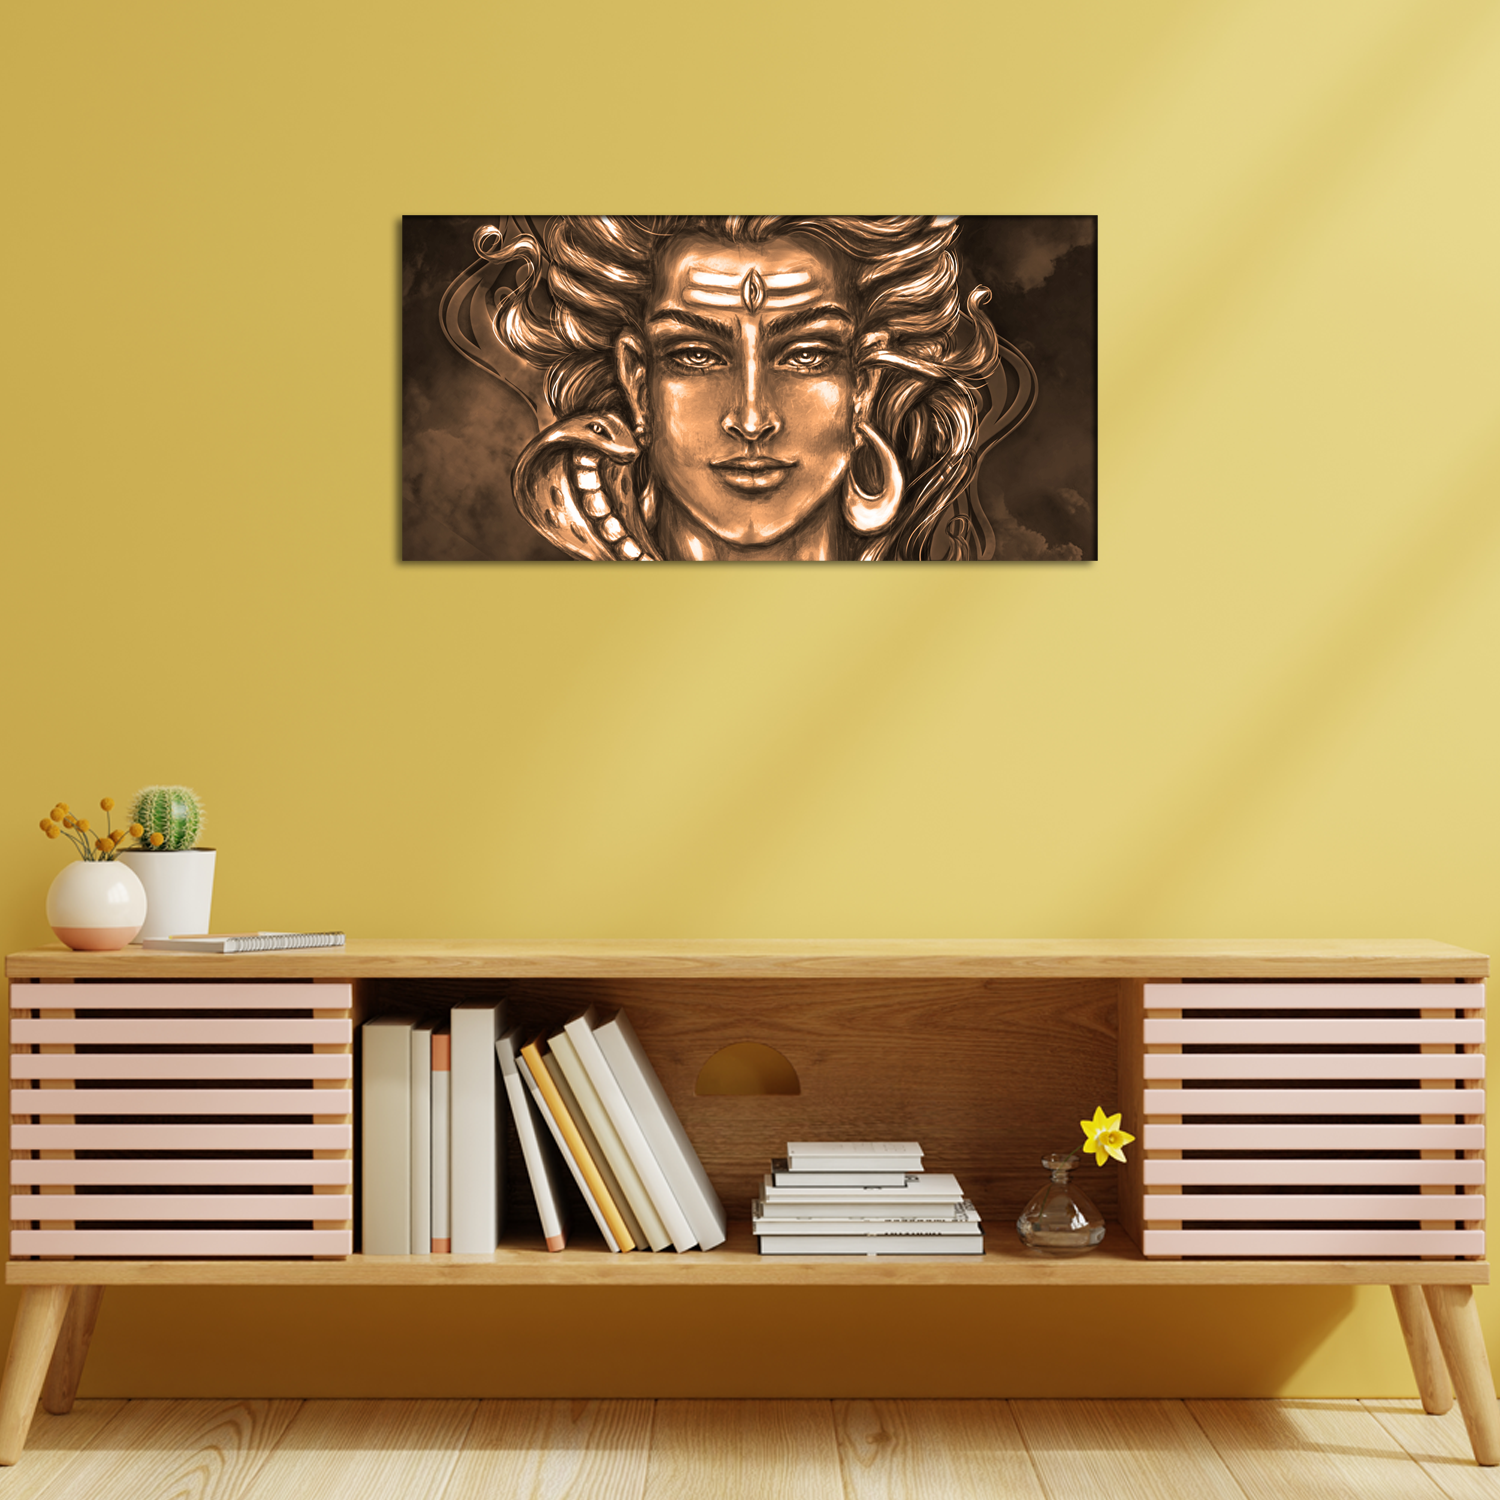 Wall Painting of Lord Shiva For Living Room